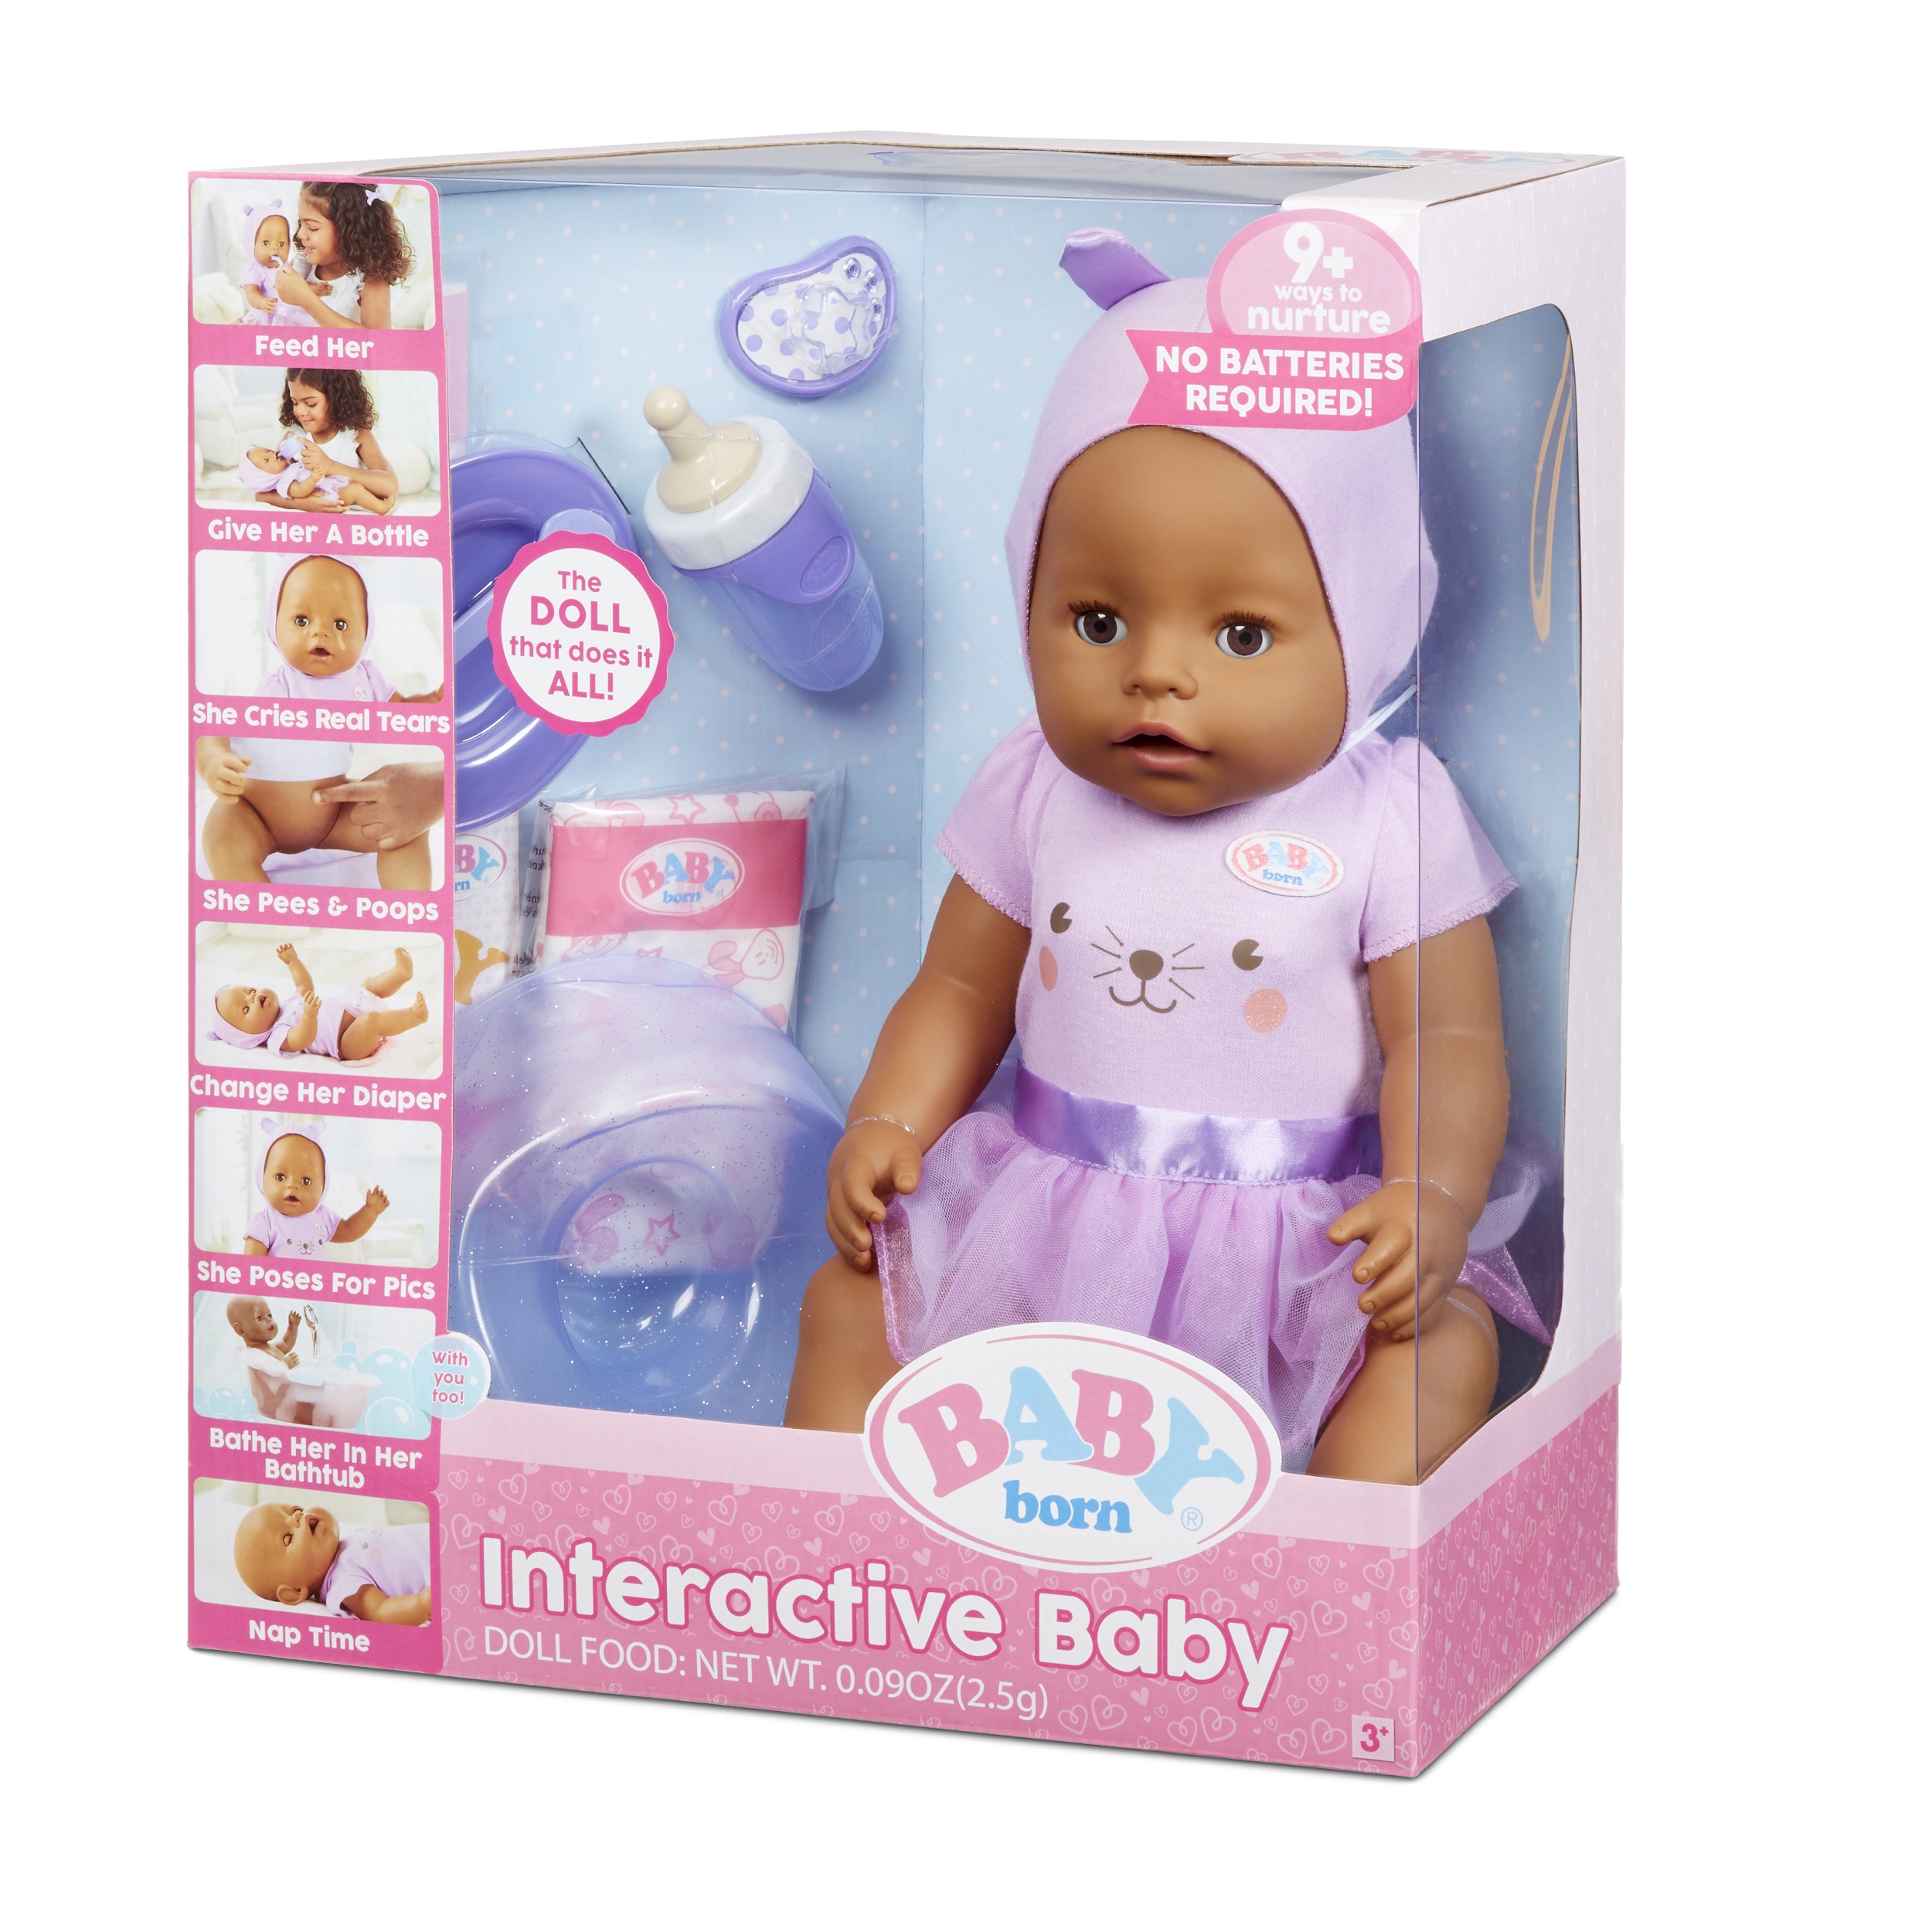 Baby born Interactive Doll Brown Eyes with 9 Ways to Nurture, Eats, Drinks, Cries, Sleeps, Bathes, and Wets - image 5 of 6